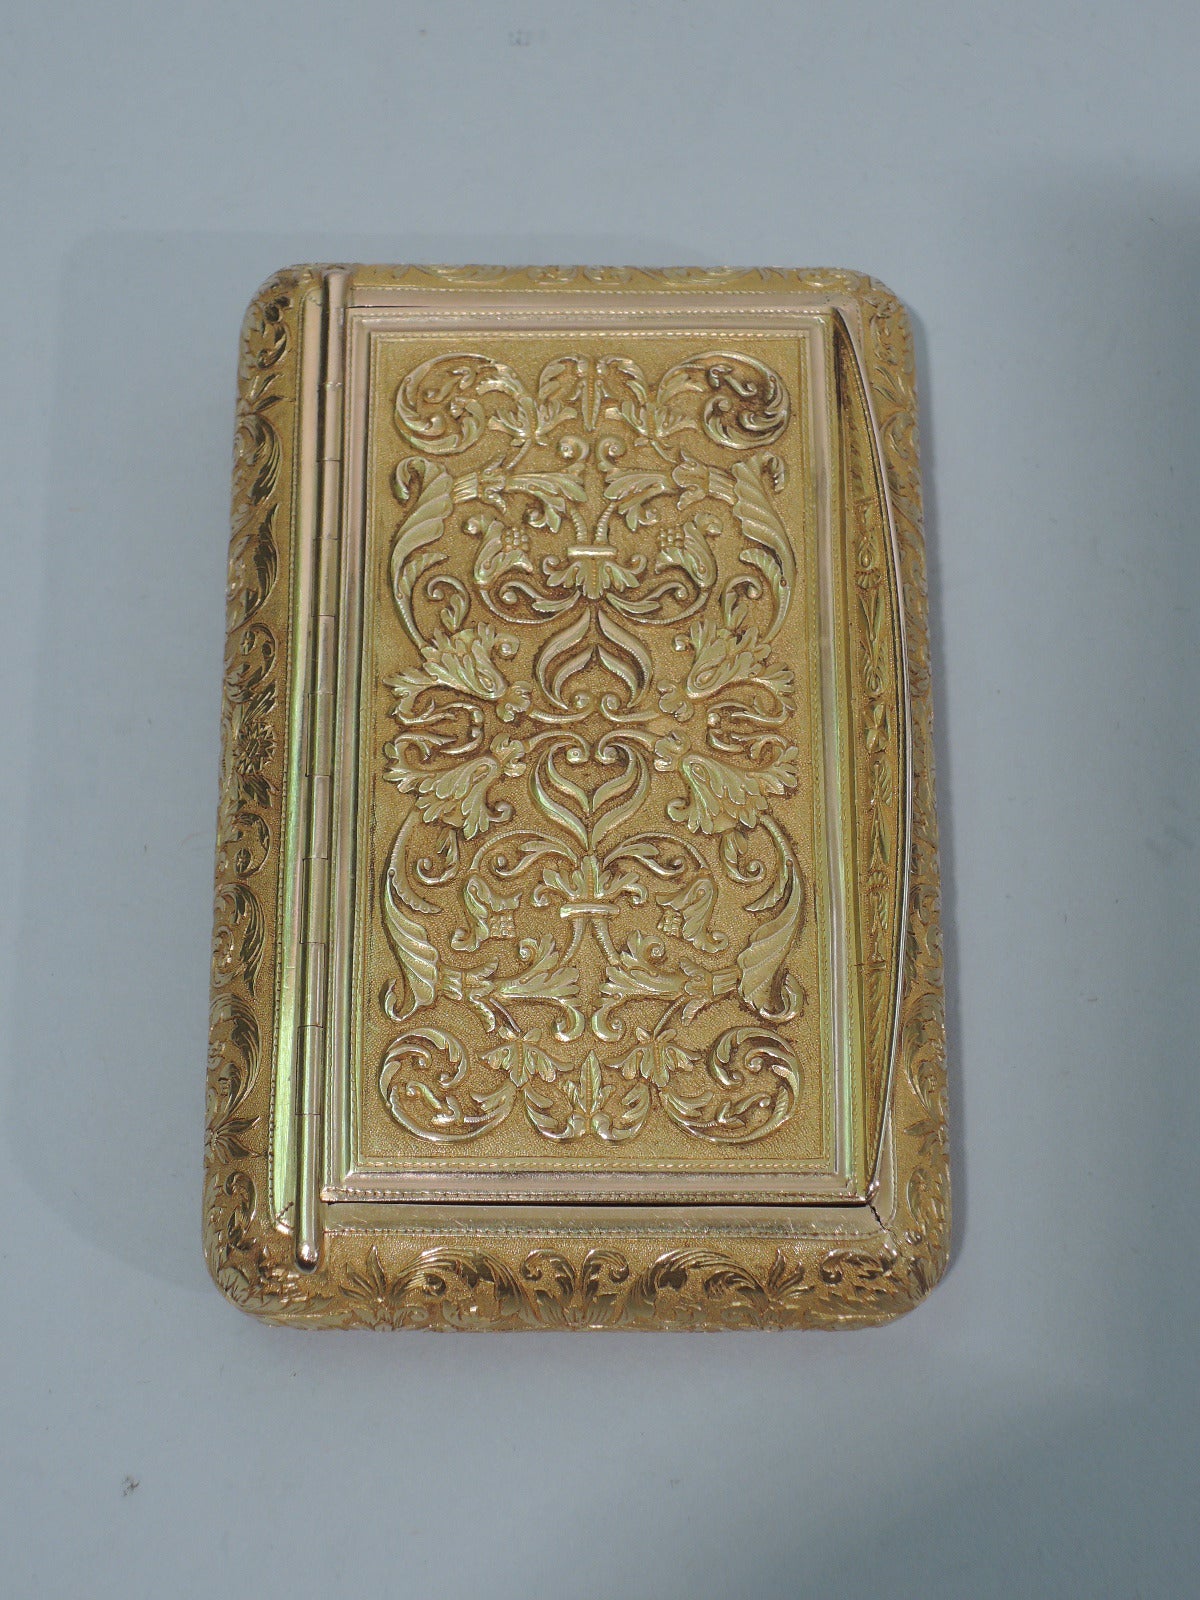 19th Century Antique European Gold Snuffbox with Superb Ornament